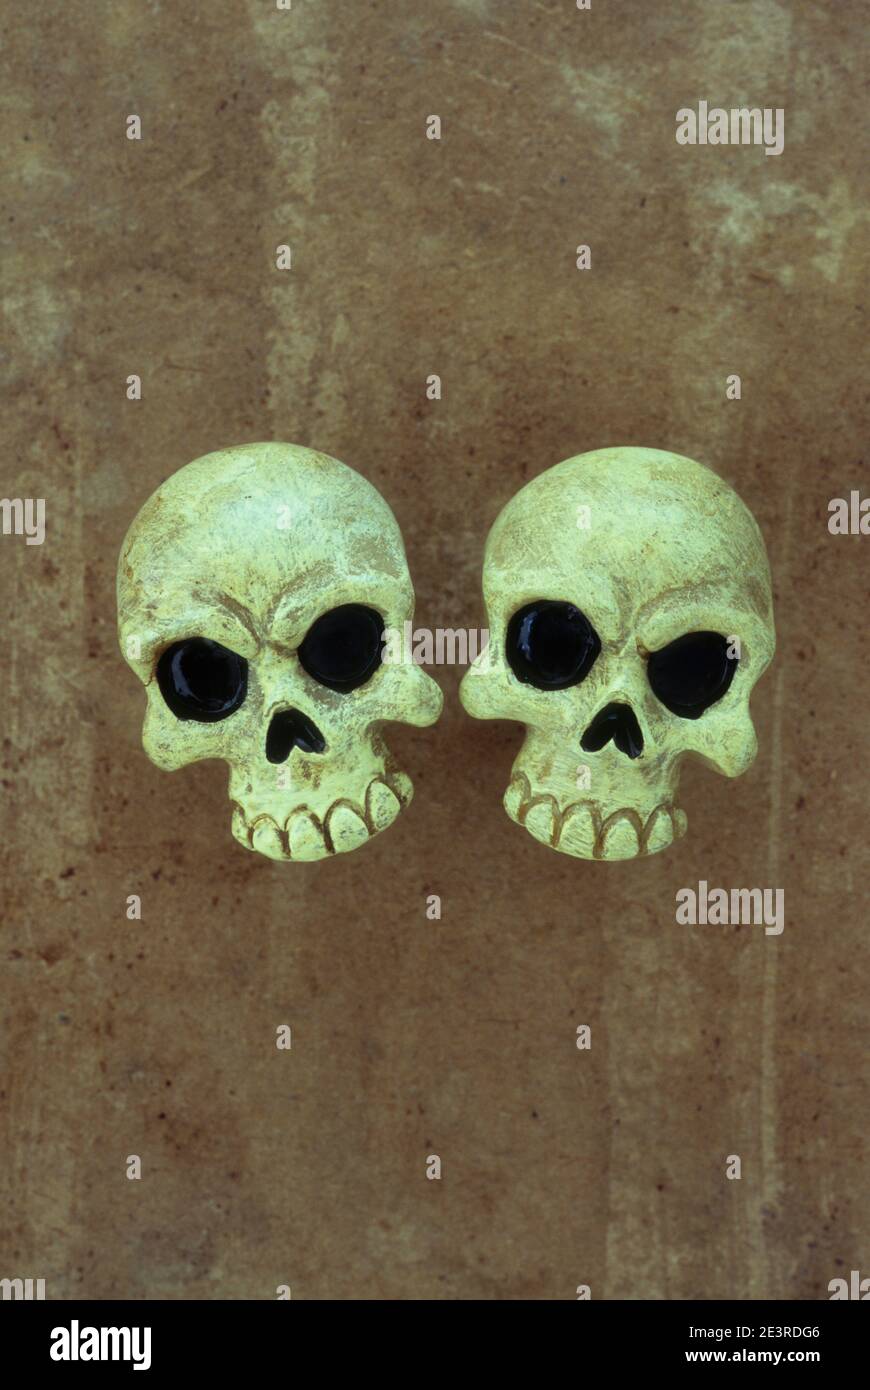 Two crude models of human skulls without lower jaws sitting side by side on rough leather Stock Photo